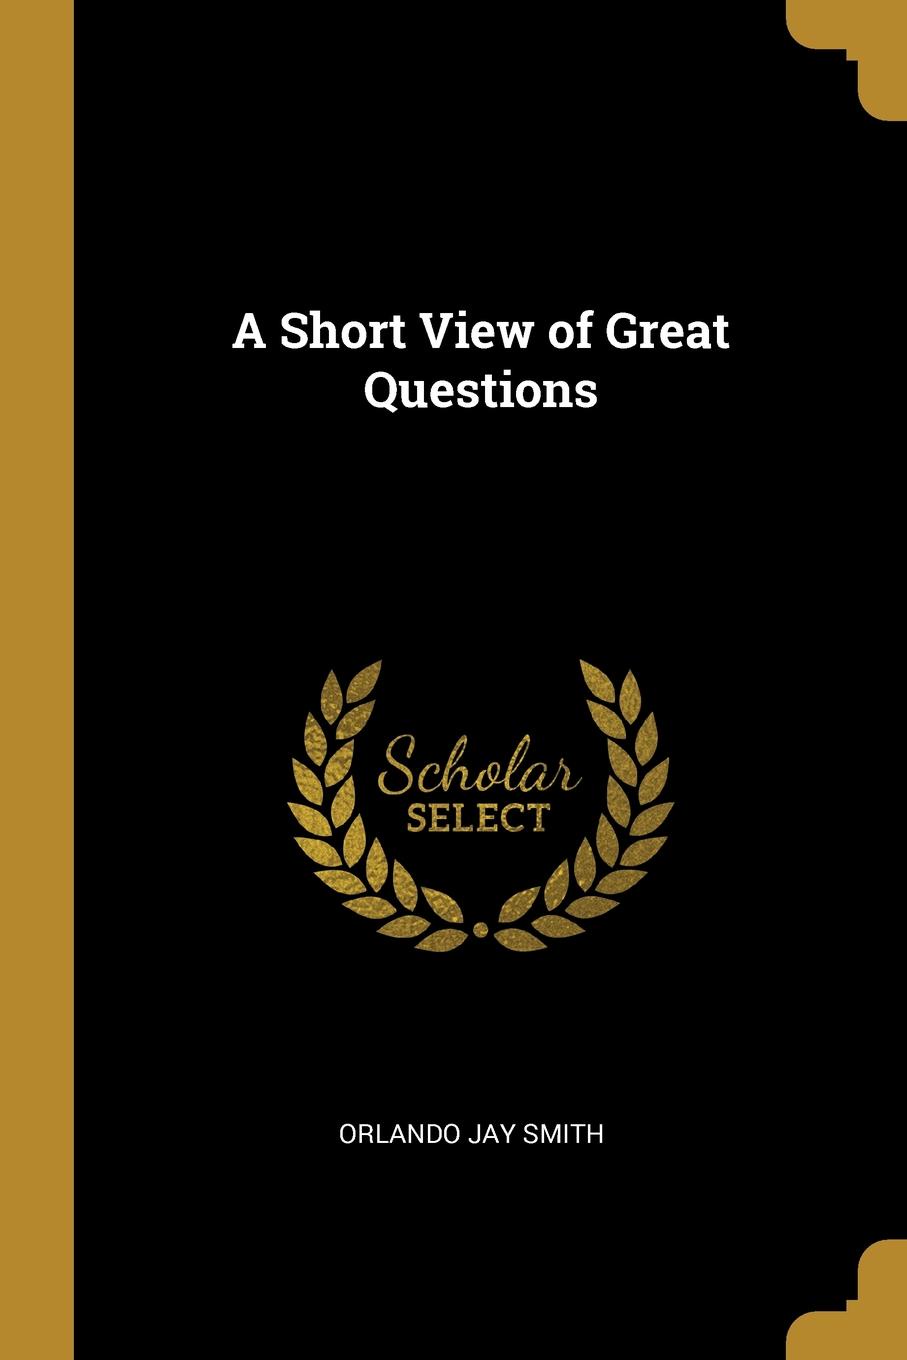 A Short View of Great Questions